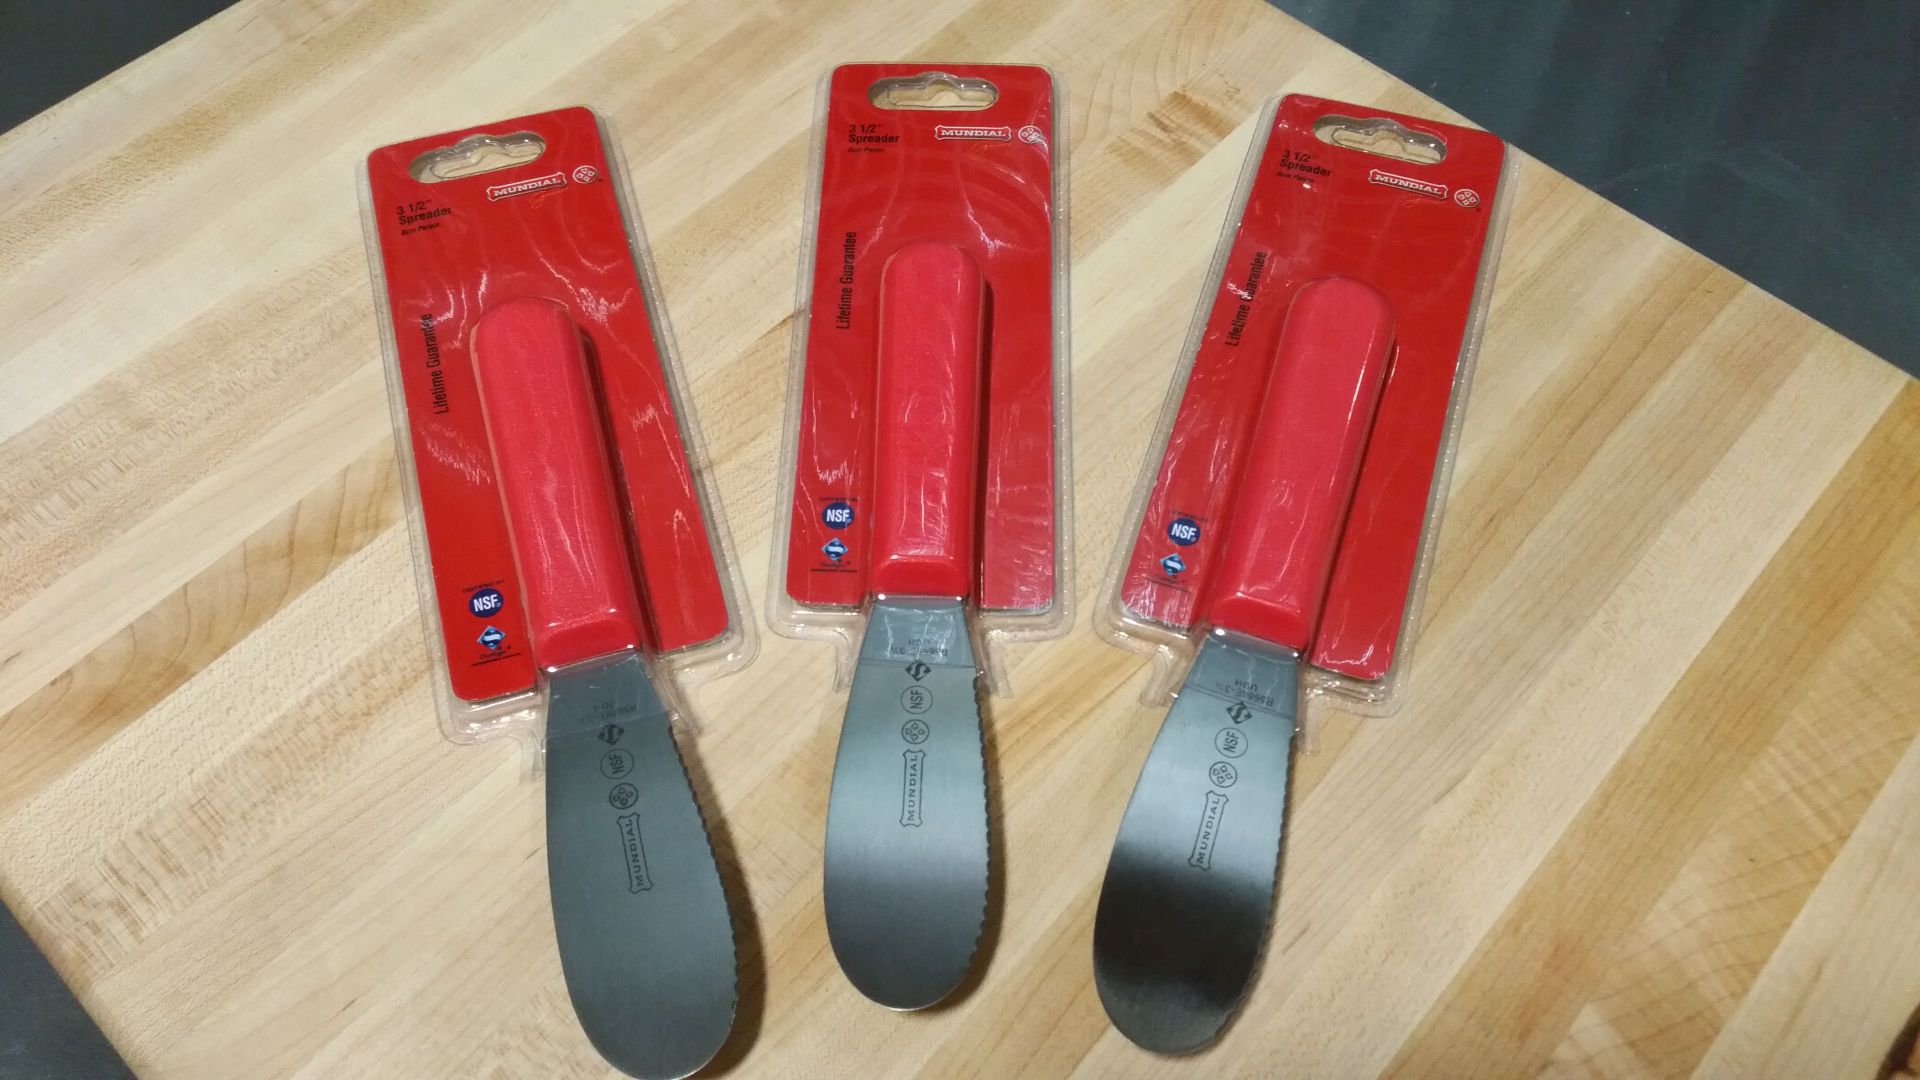 3.5" Serrated Sandwich Spreaders Mundial 5688E-3-1/2 - Lot of 3 (Retail Packaging)